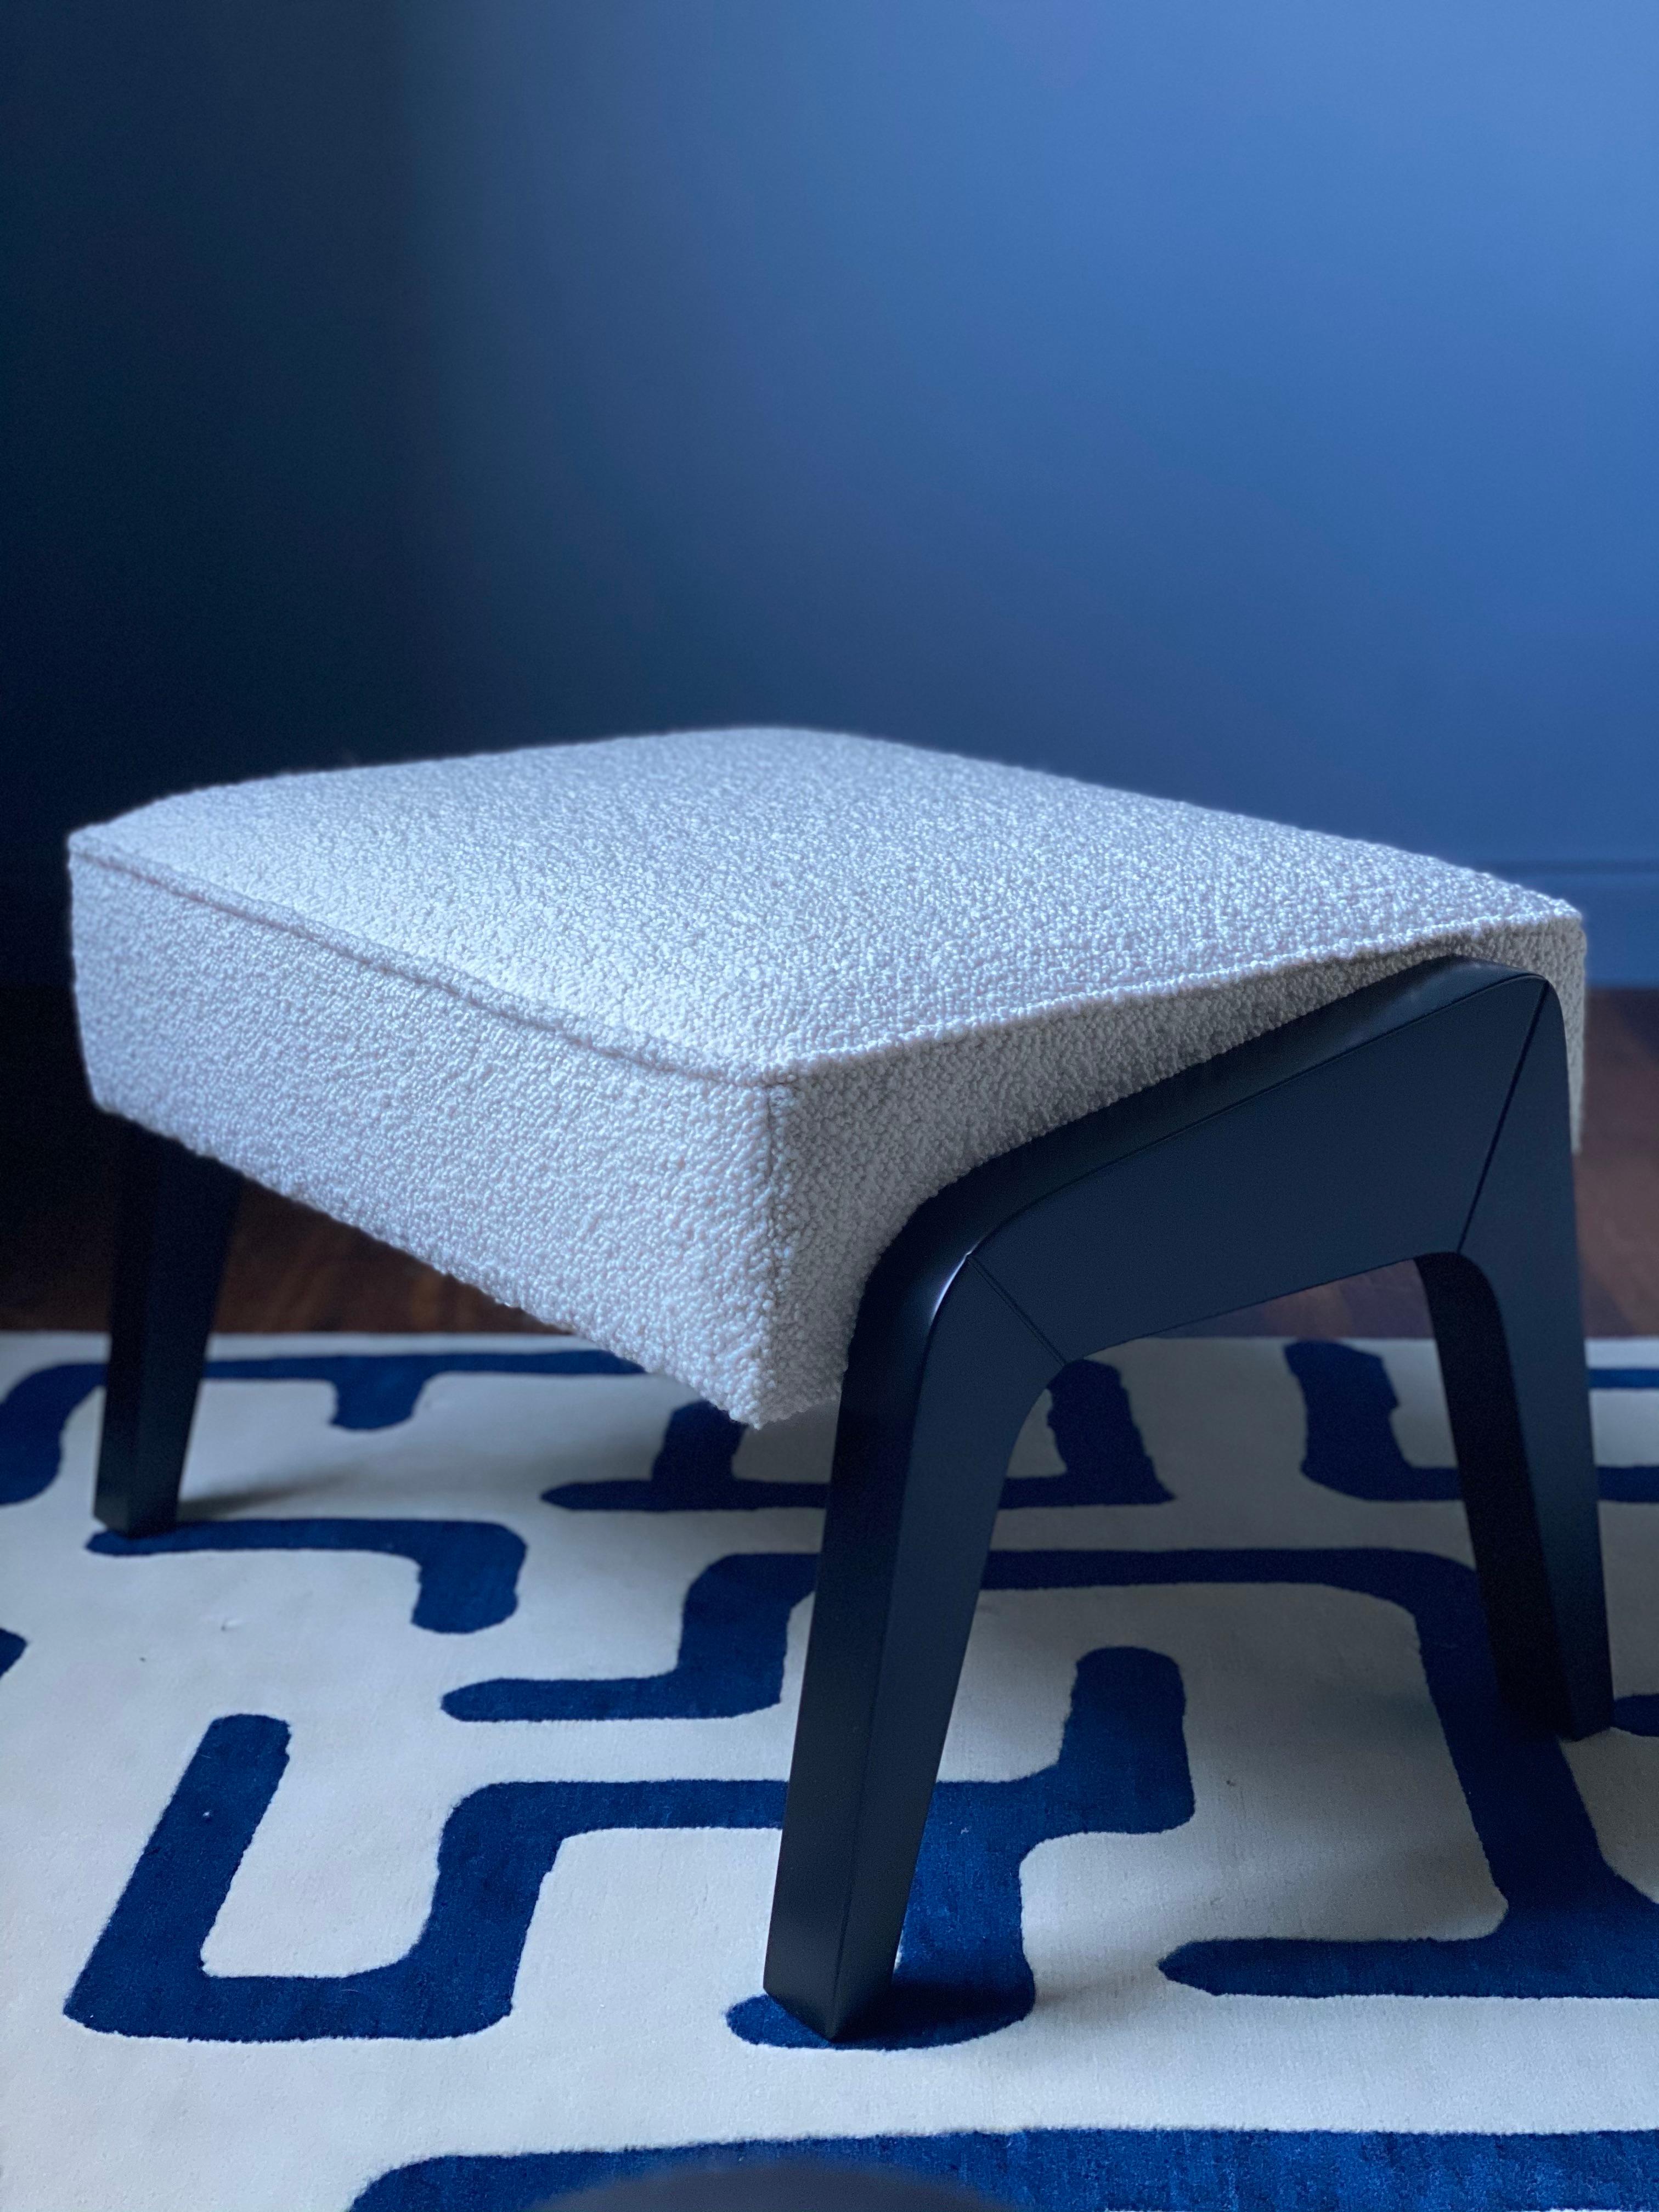 A brand-new addition to the Atena collection, is the Atena ottoman. While donning the same curvaceous features and organic textures, the Atena ottoman pairs perfectly with all the Atena chair designs but will also Stand beautifully on its own in any